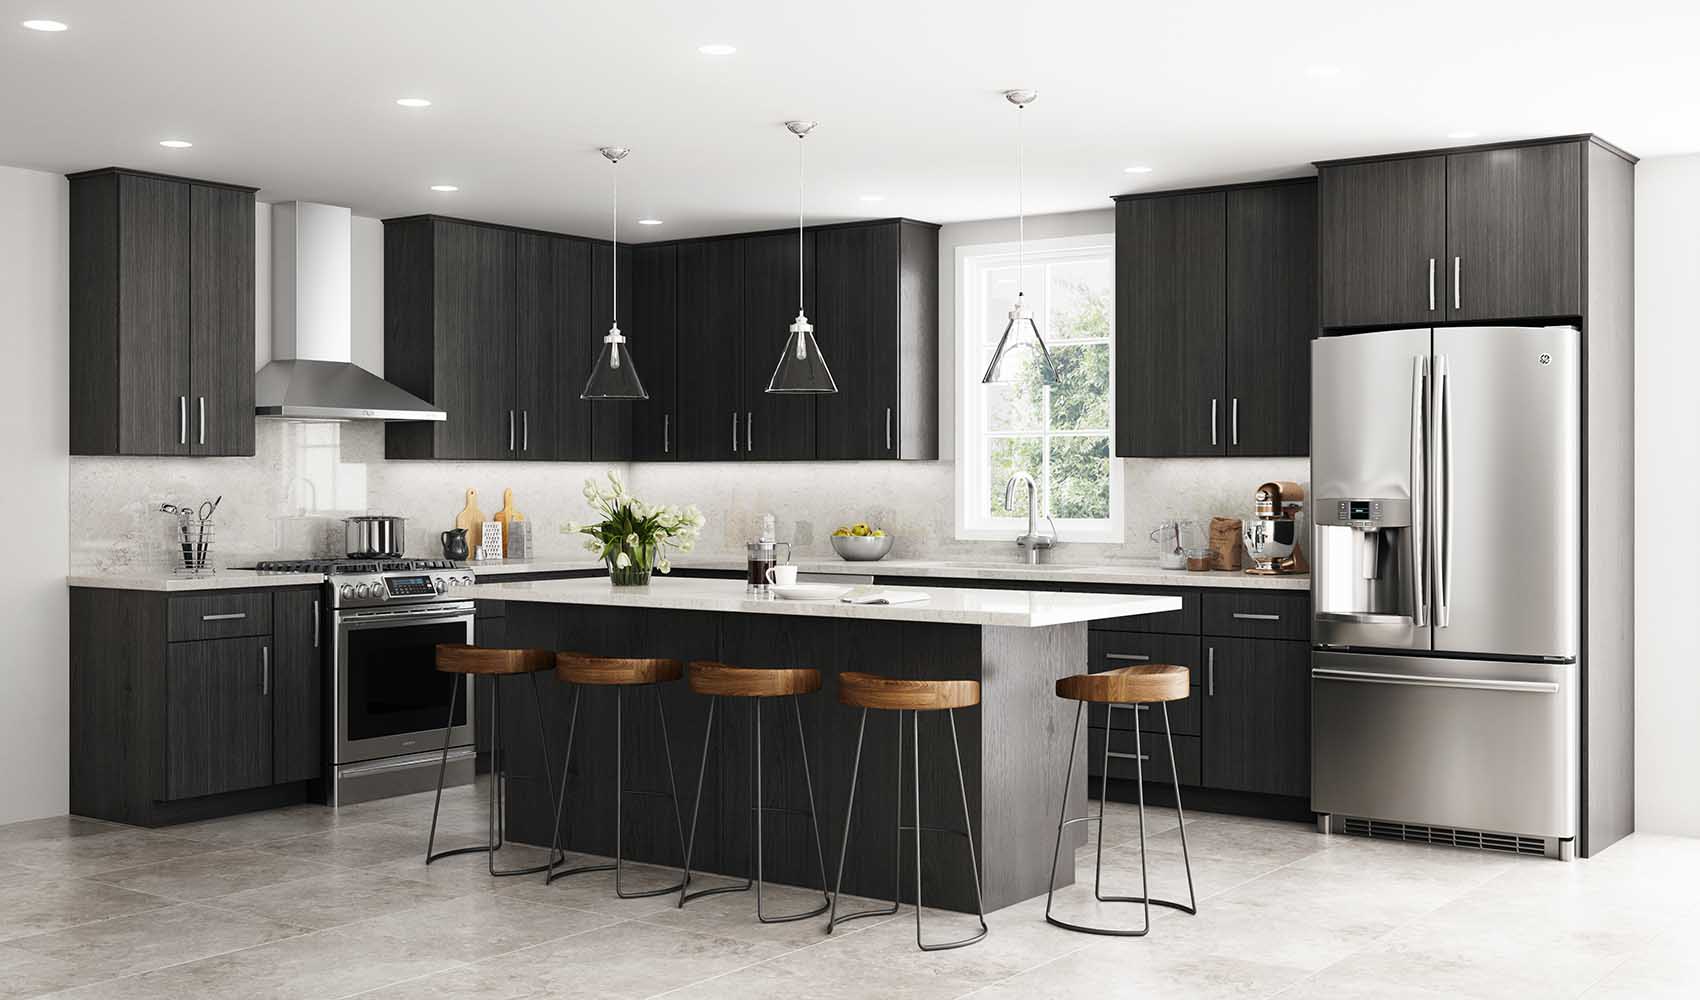 [Kitchen Cabinets] Styles, Colors, & Features | Heartland ...